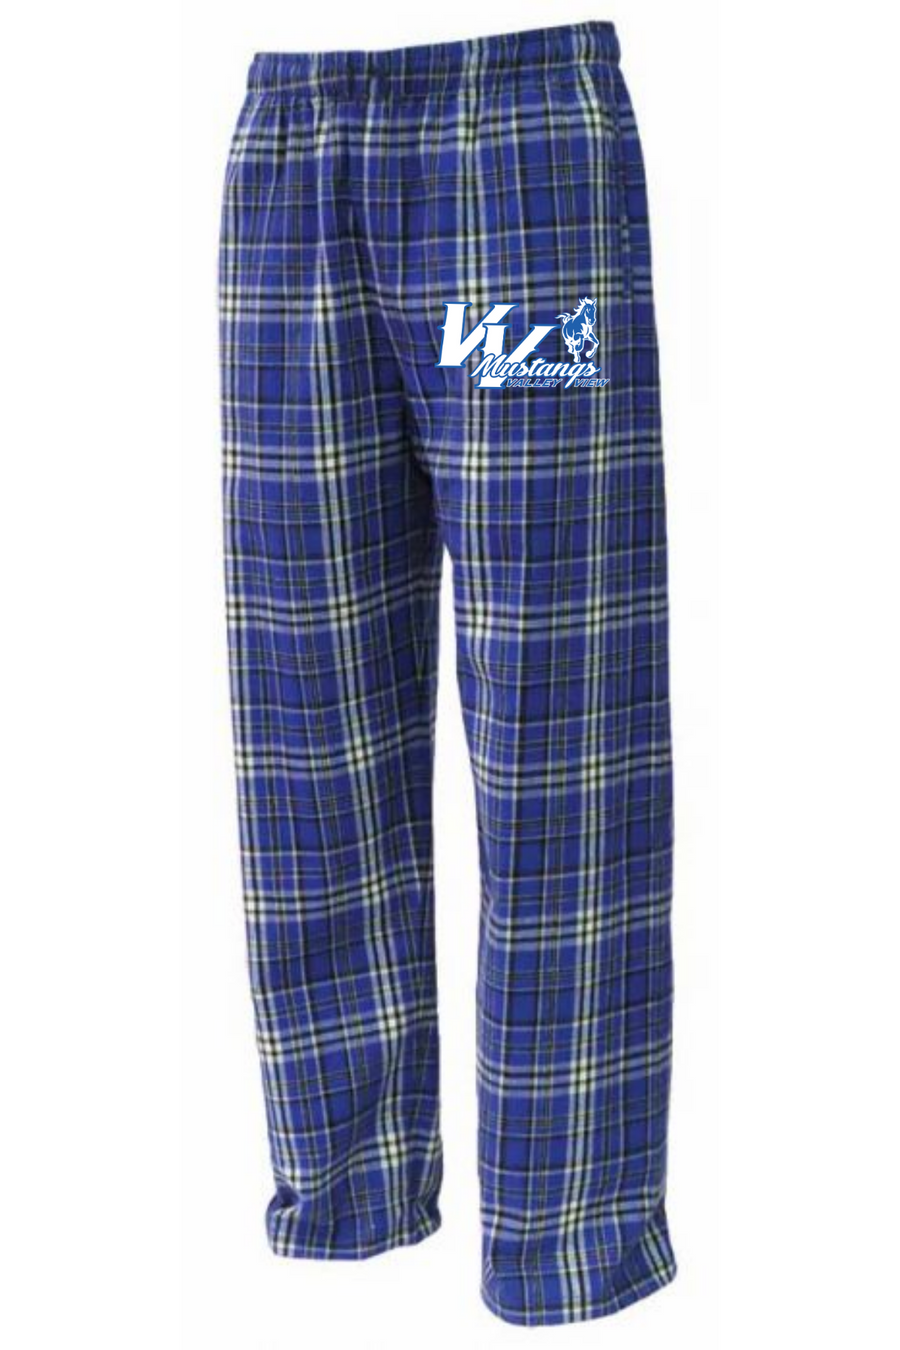 Valley View Elementary Back to School On-Demand-Flannel Pants